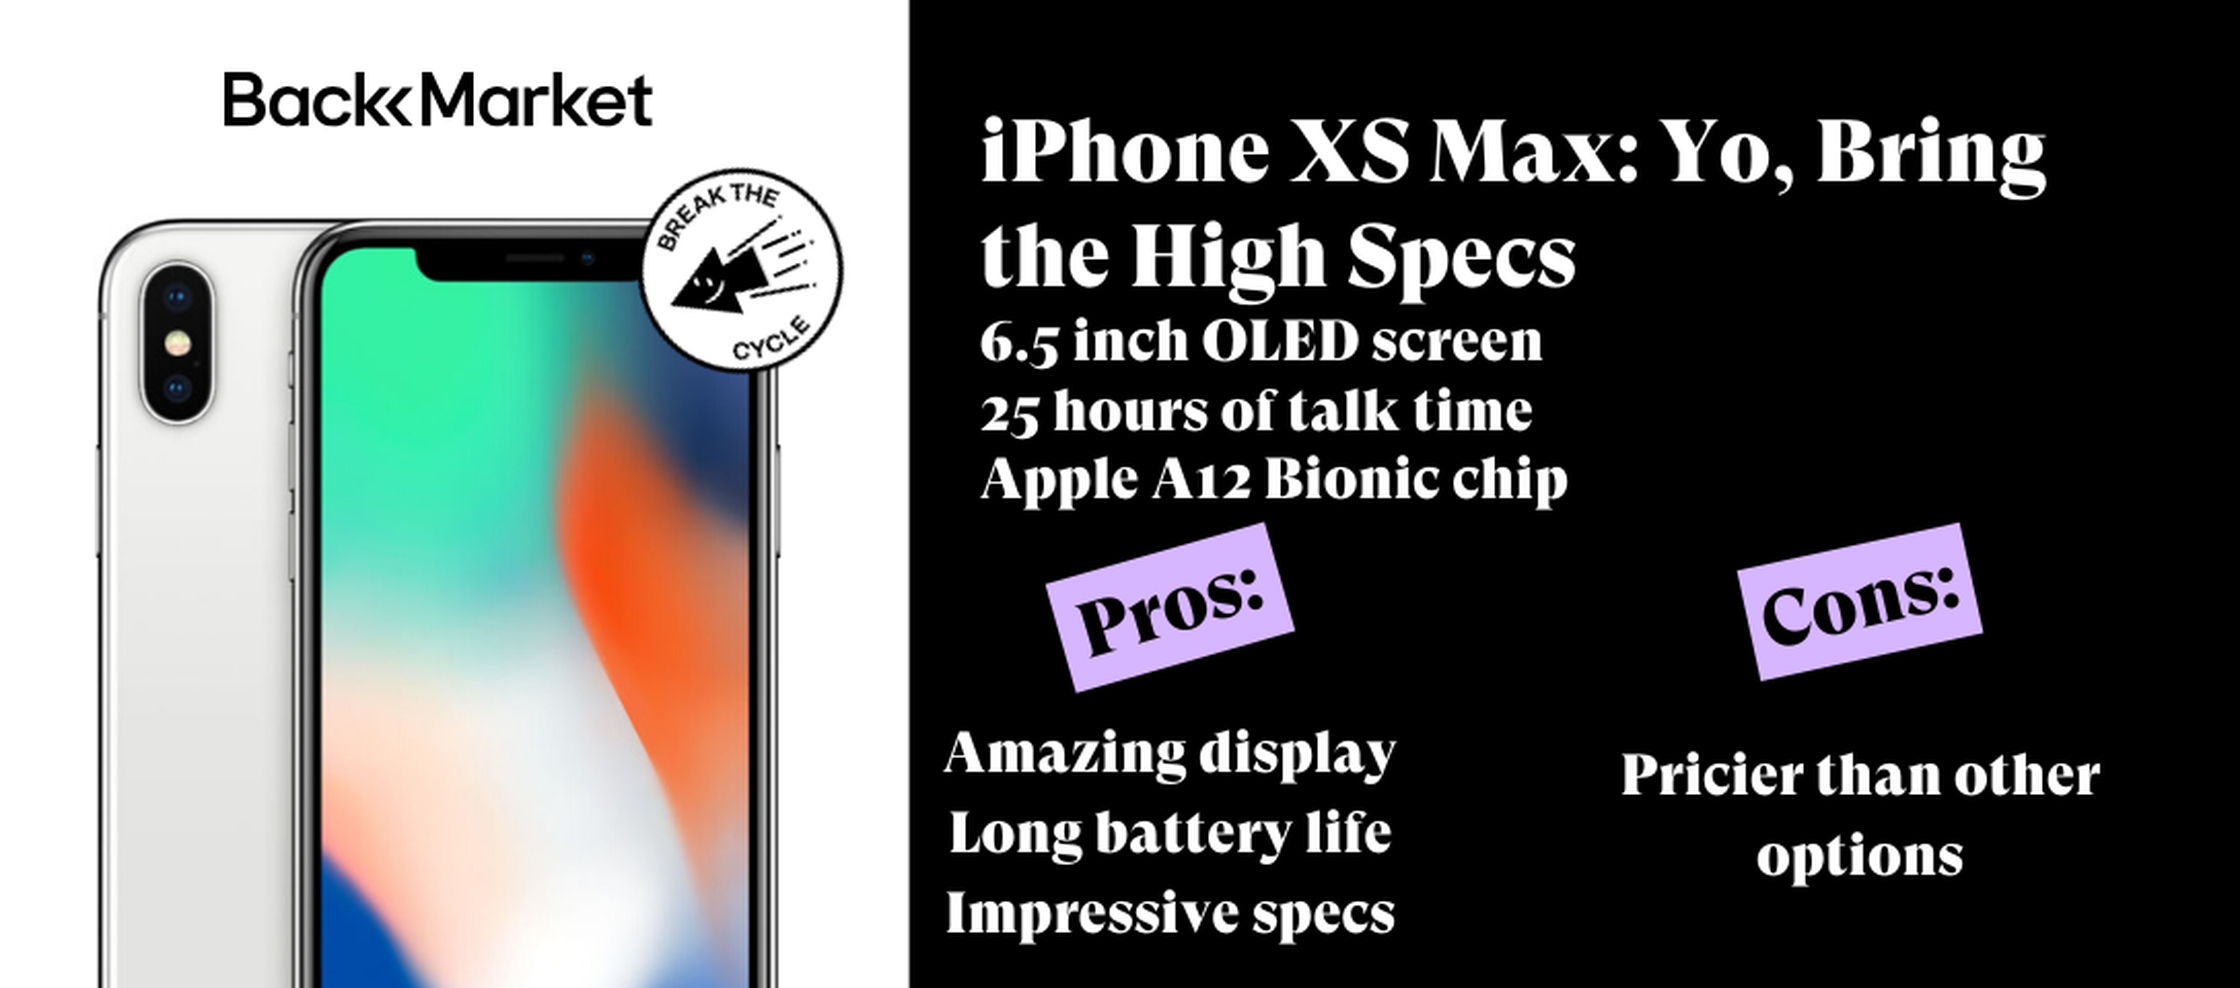 iPhone XS Max pros and cons